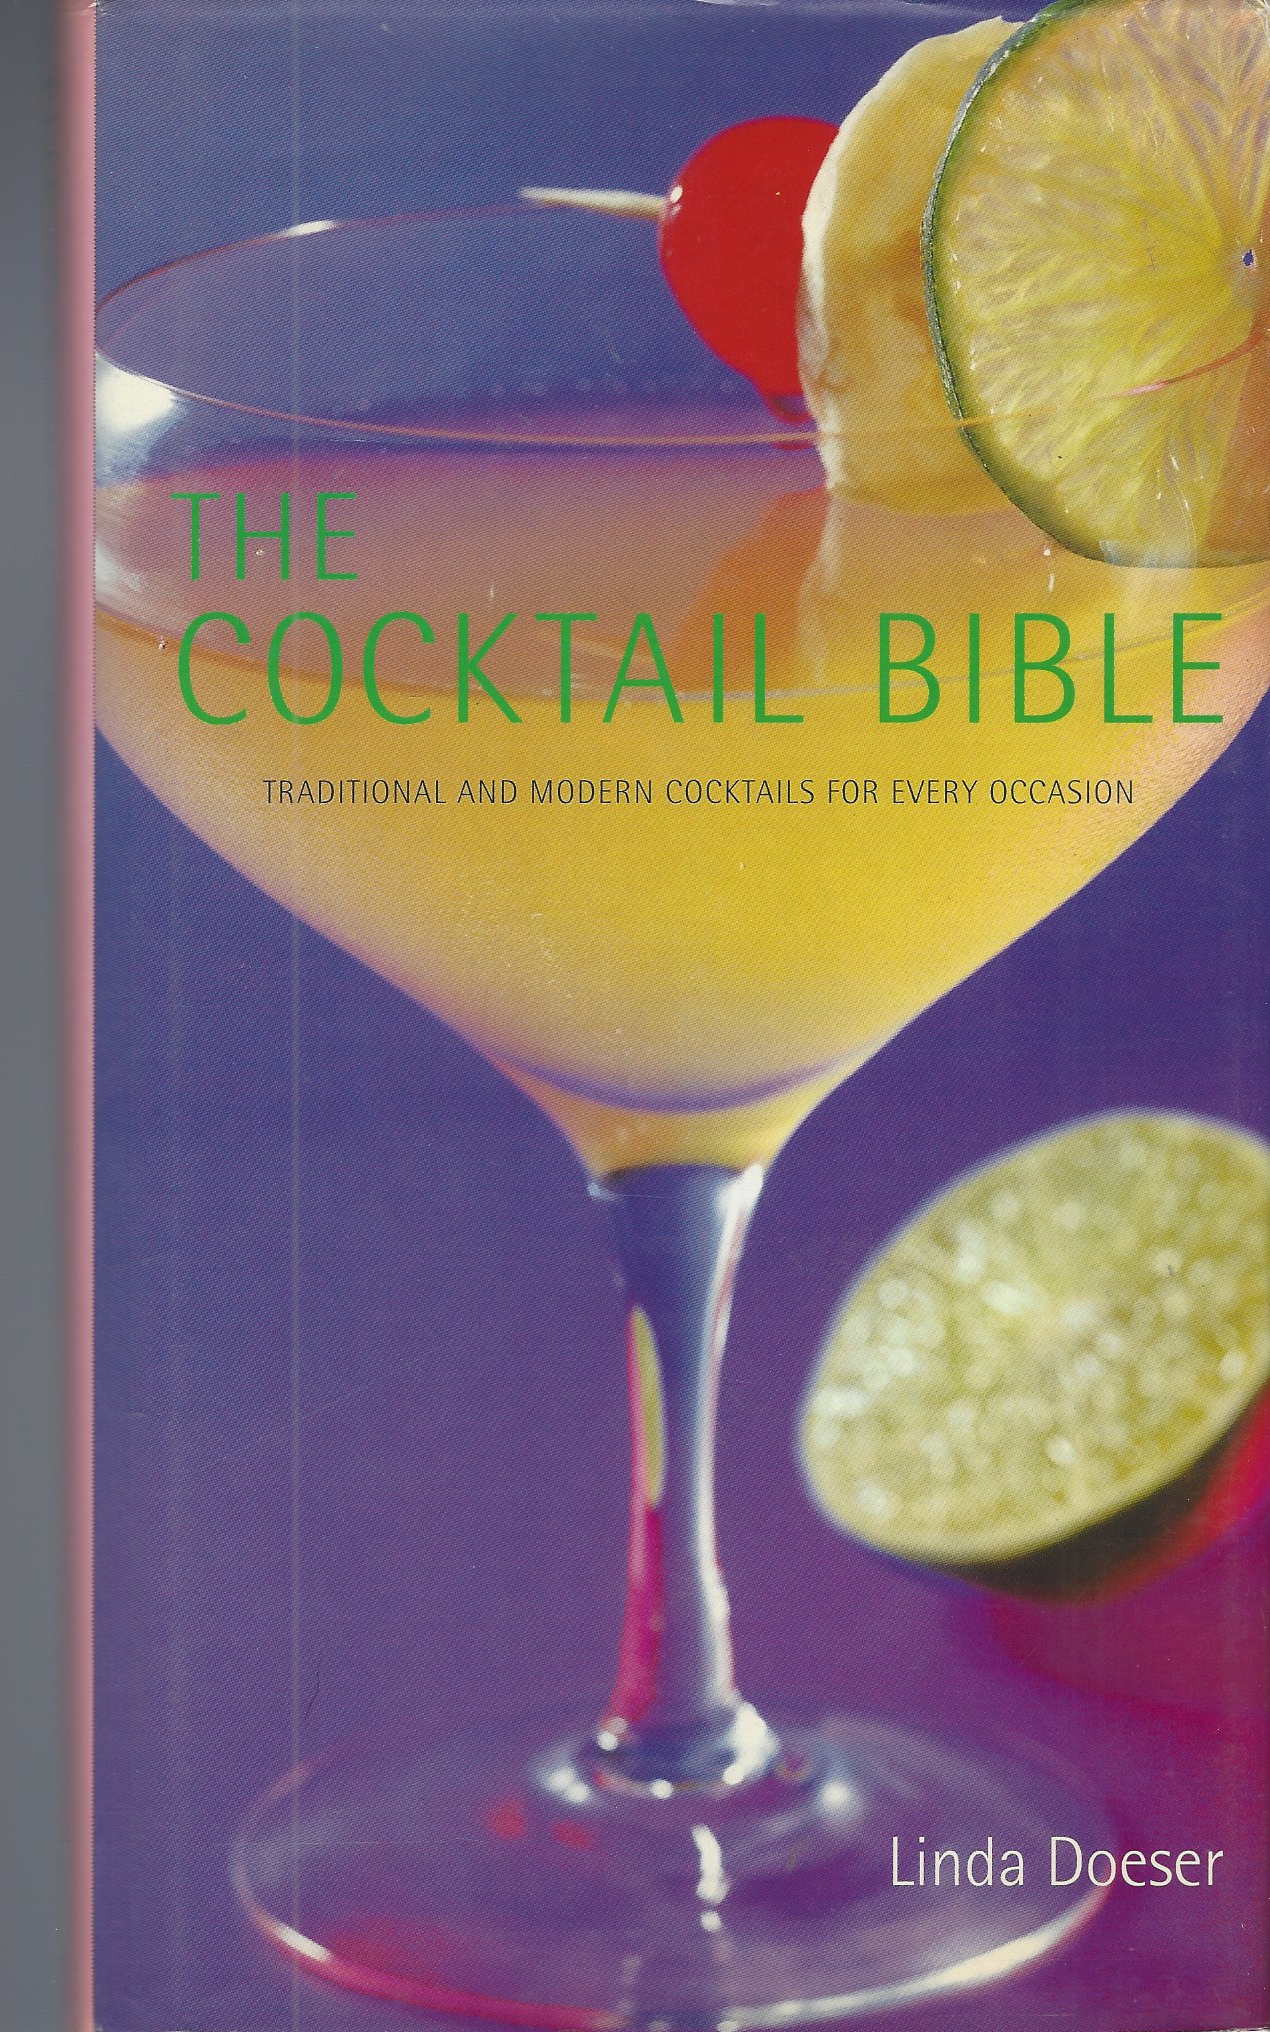 DOESER LINDA - Cocktail Bible: Traditional and Modern Cocktails for Every Occasion